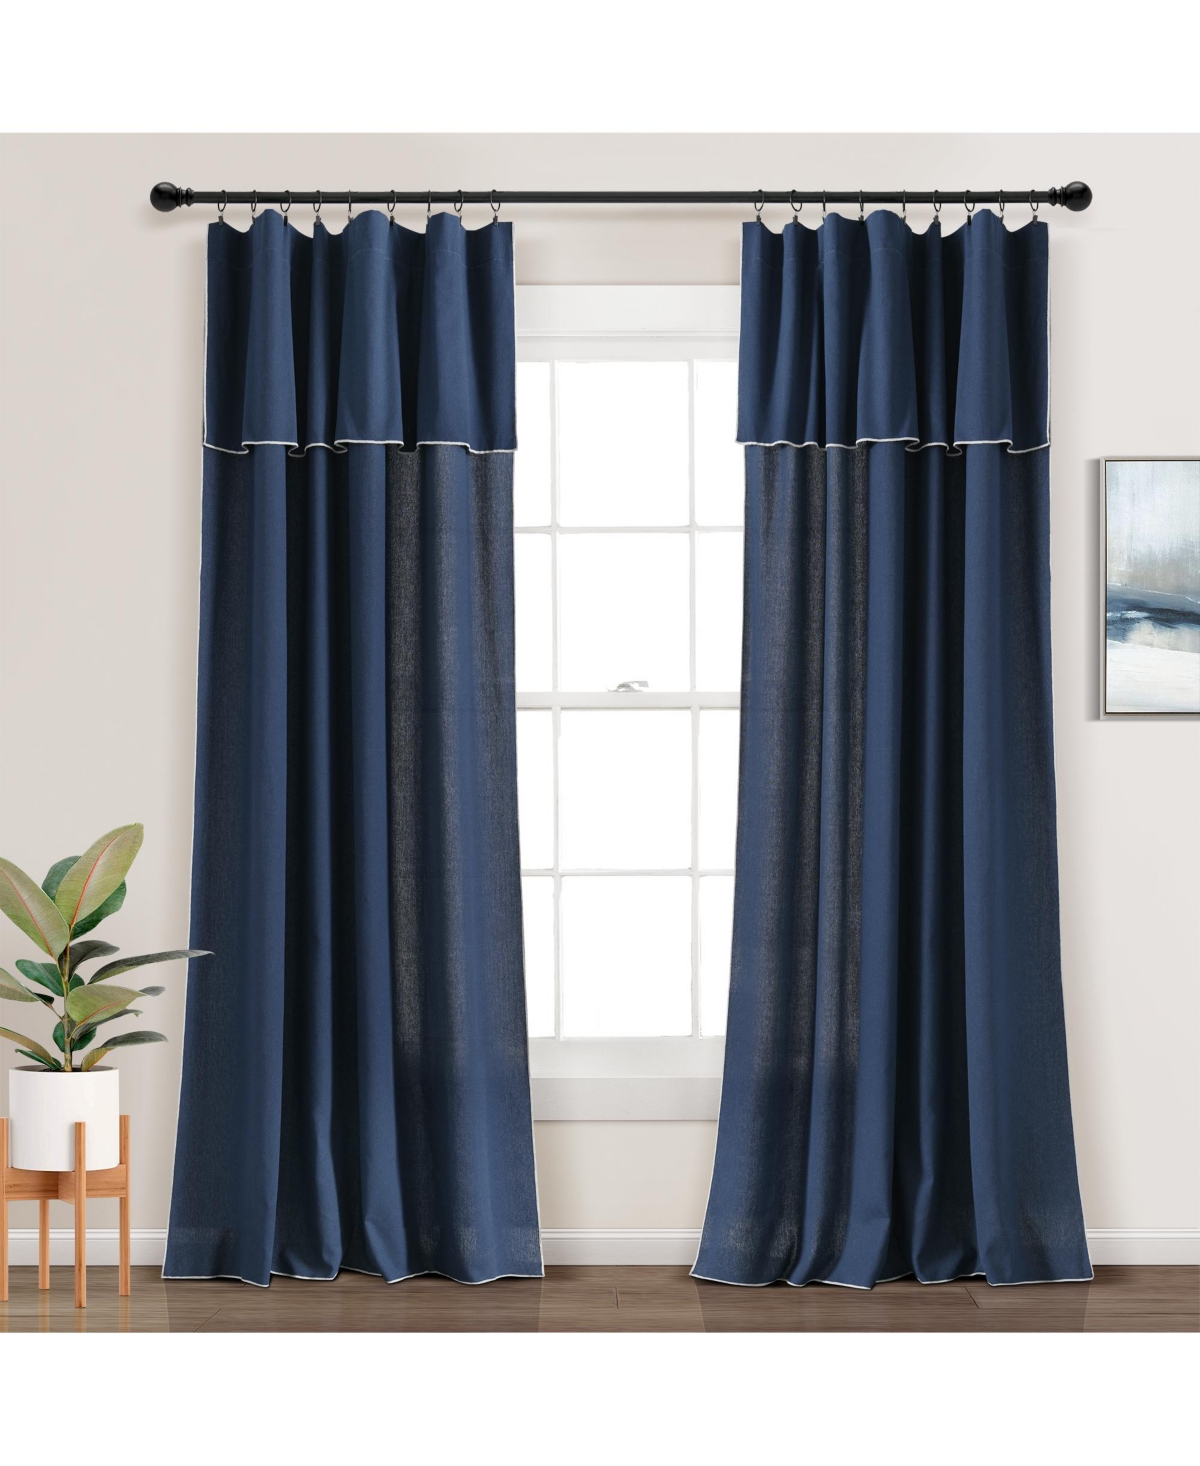 Lush Decor Modern Faux Linen Embroidered Edge With Attached Valance Window Curtain Panels In Navy